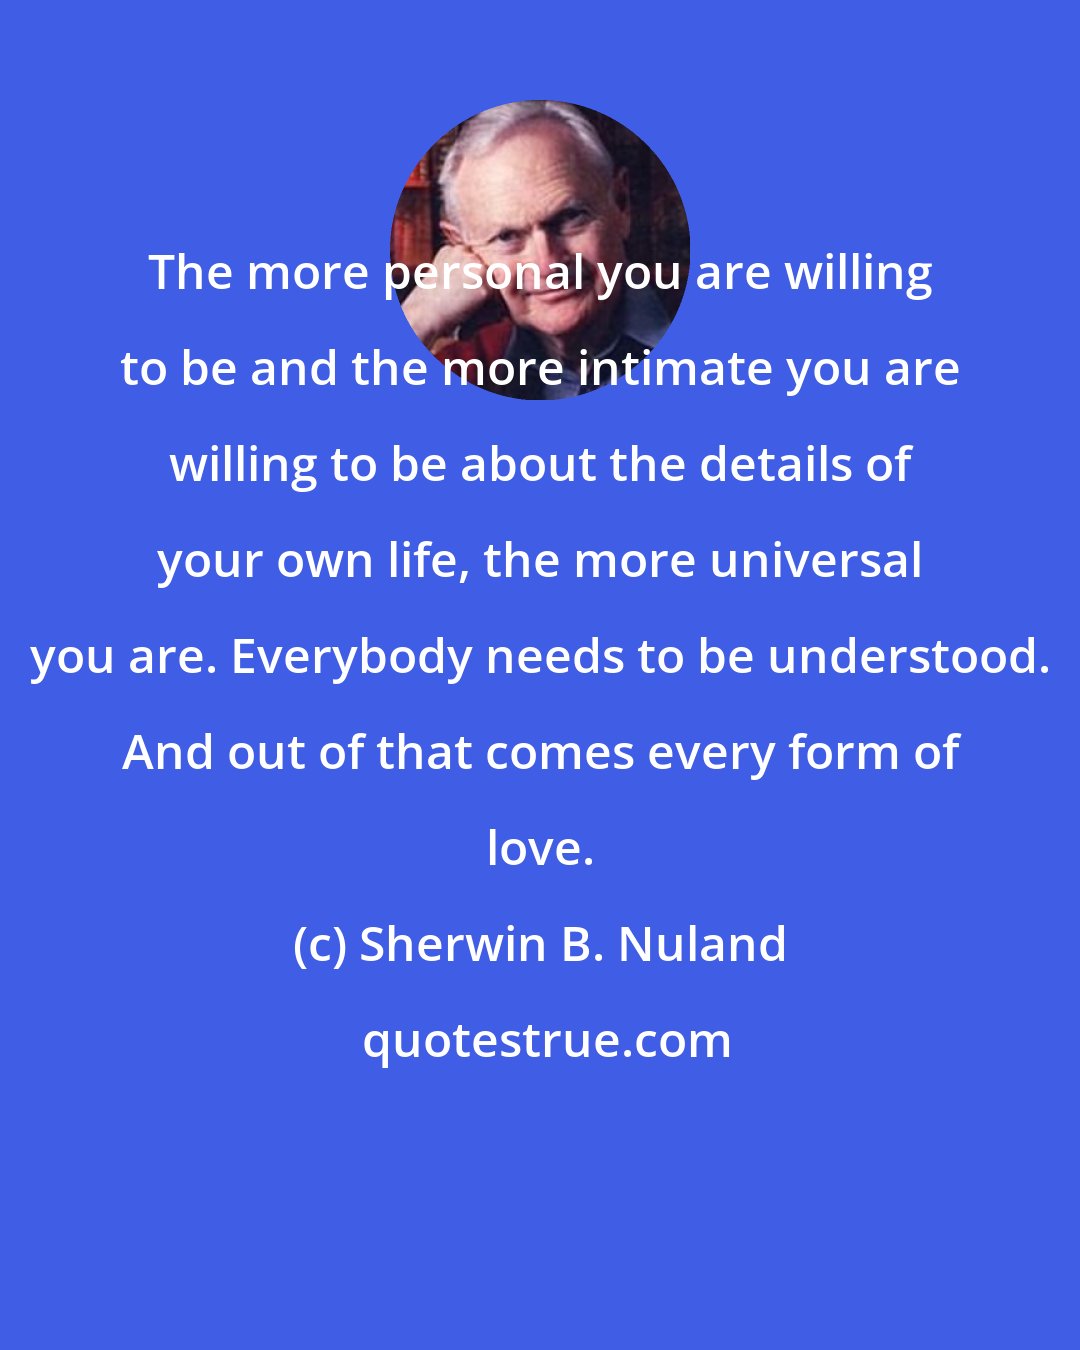 Sherwin B. Nuland: The more personal you are willing to be and the more intimate you are willing to be about the details of your own life, the more universal you are. Everybody needs to be understood. And out of that comes every form of love.